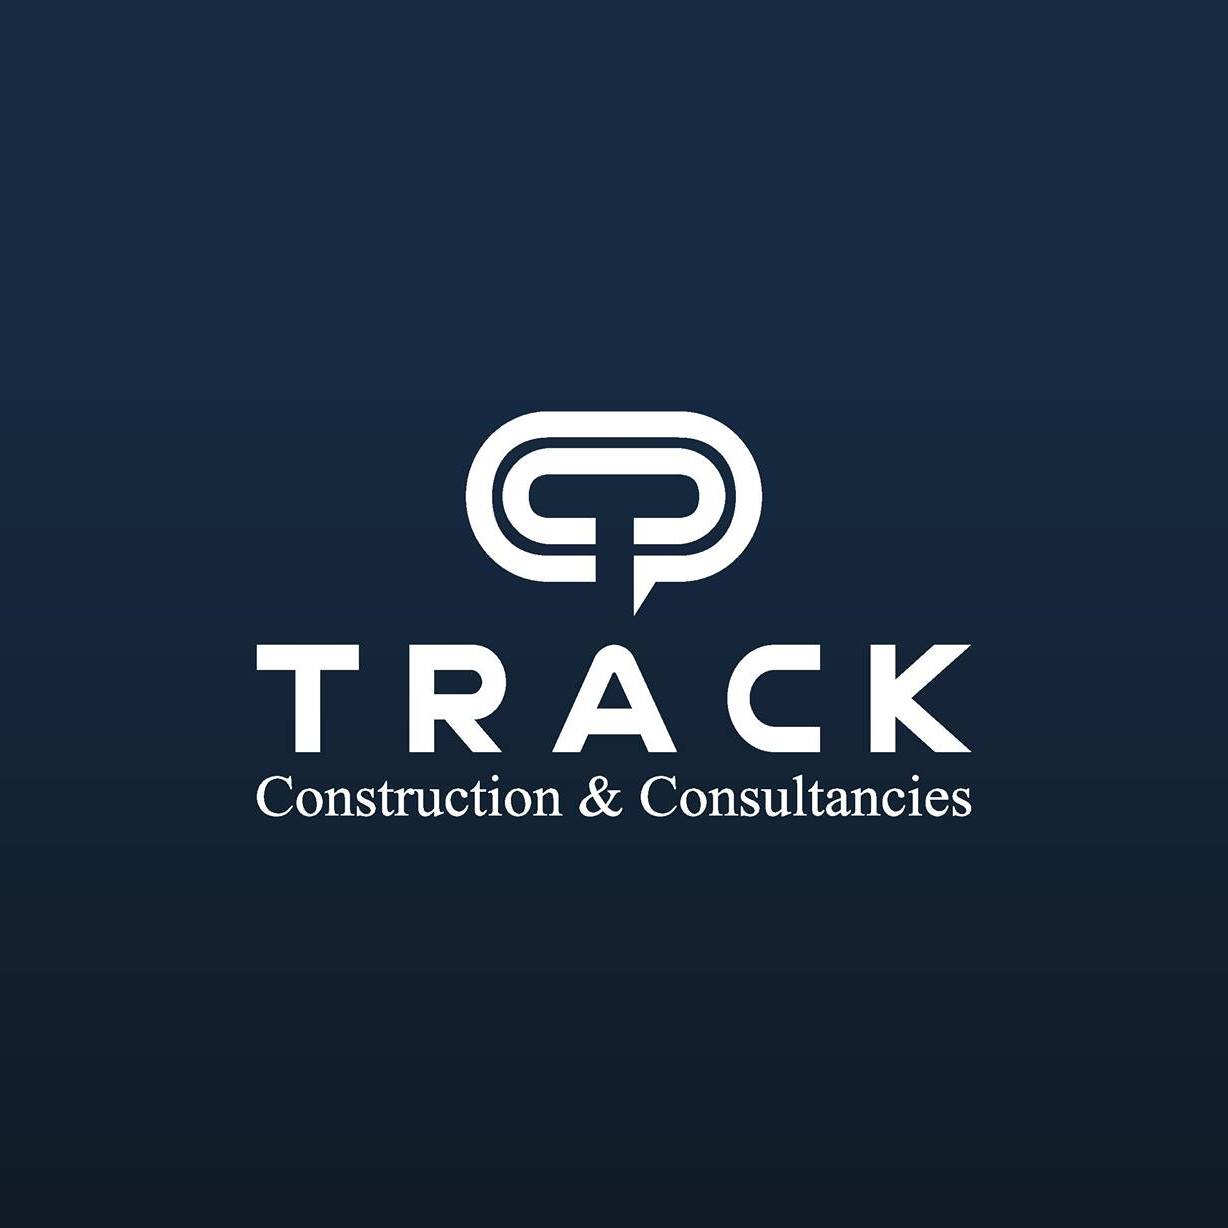 TRACK Construction & Consulting